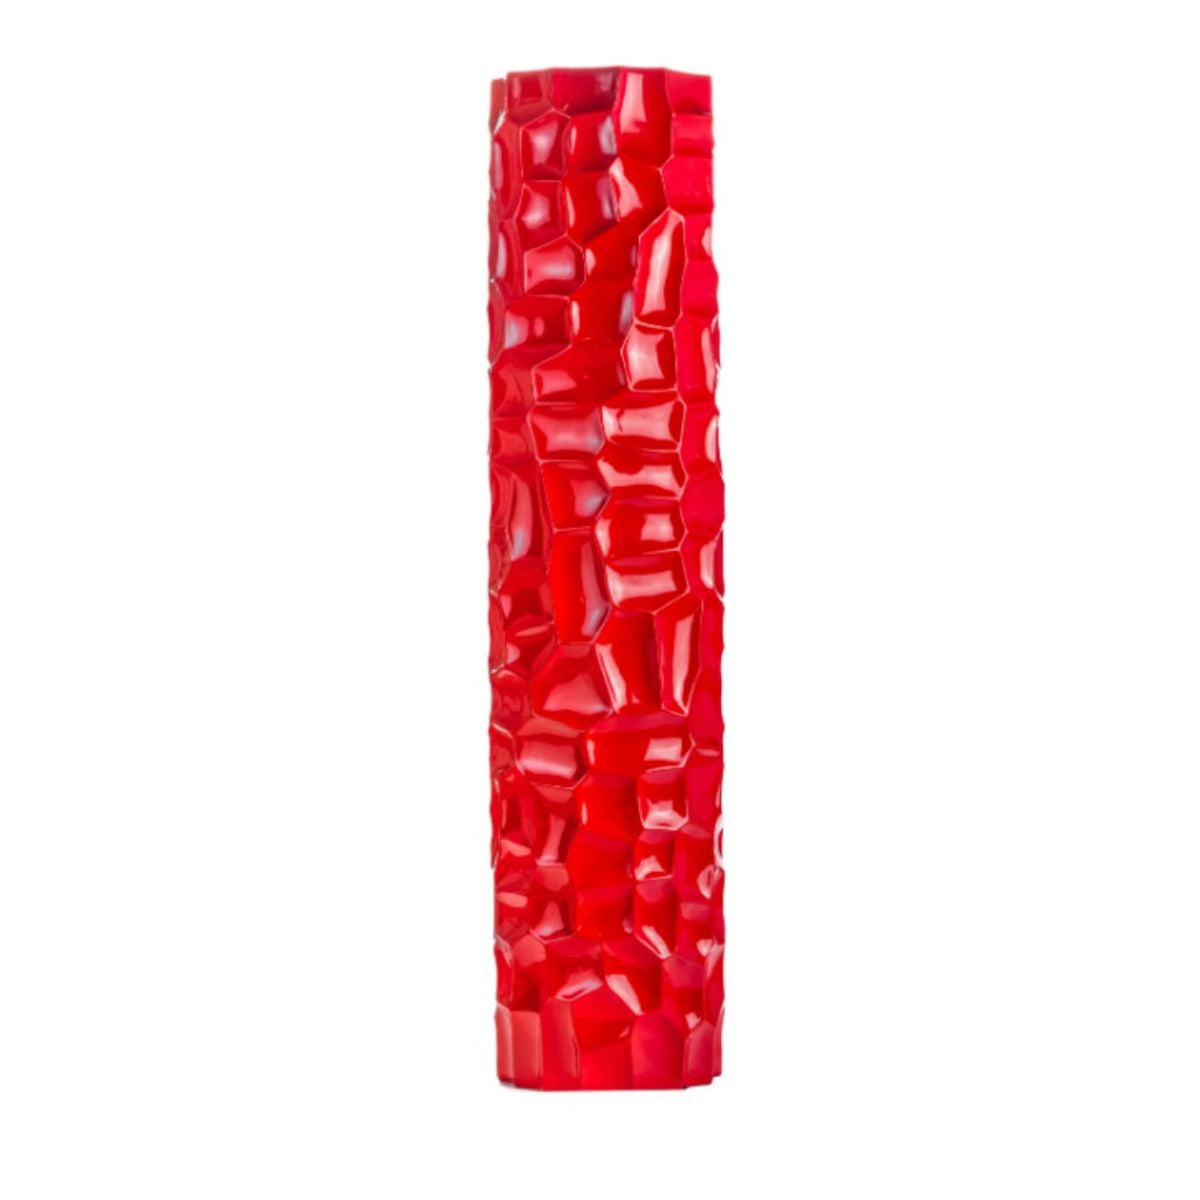 Finesse Decor Textured 52-Inch Honeycomb Vase in Red